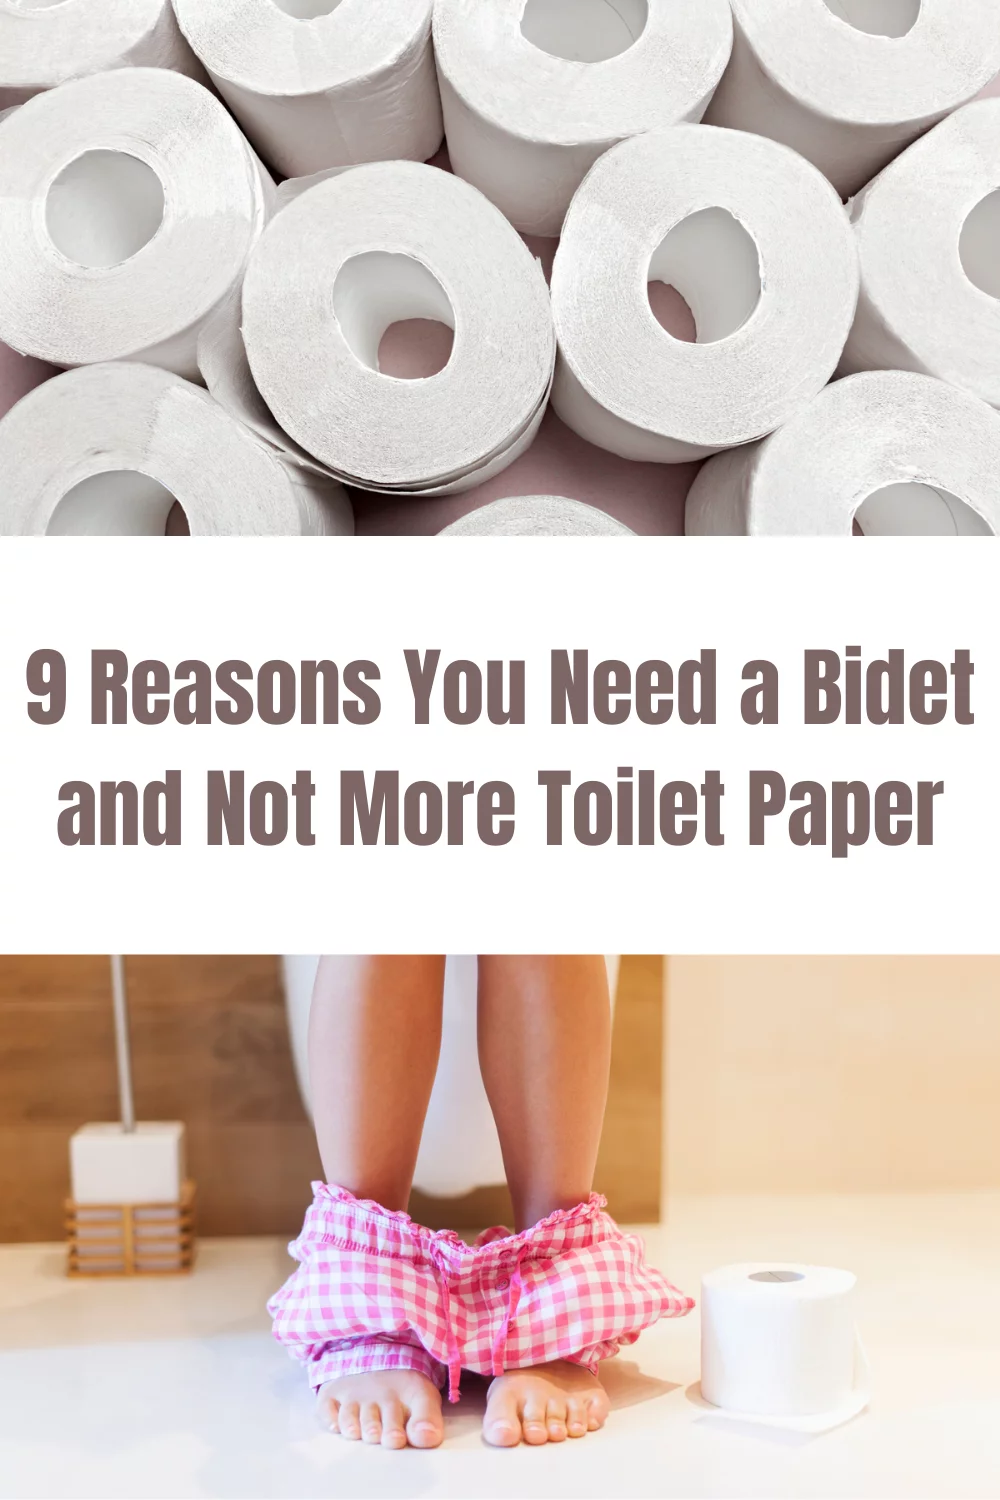 9 Reasons Why You Need a Bidet and Not More Toilet Paper